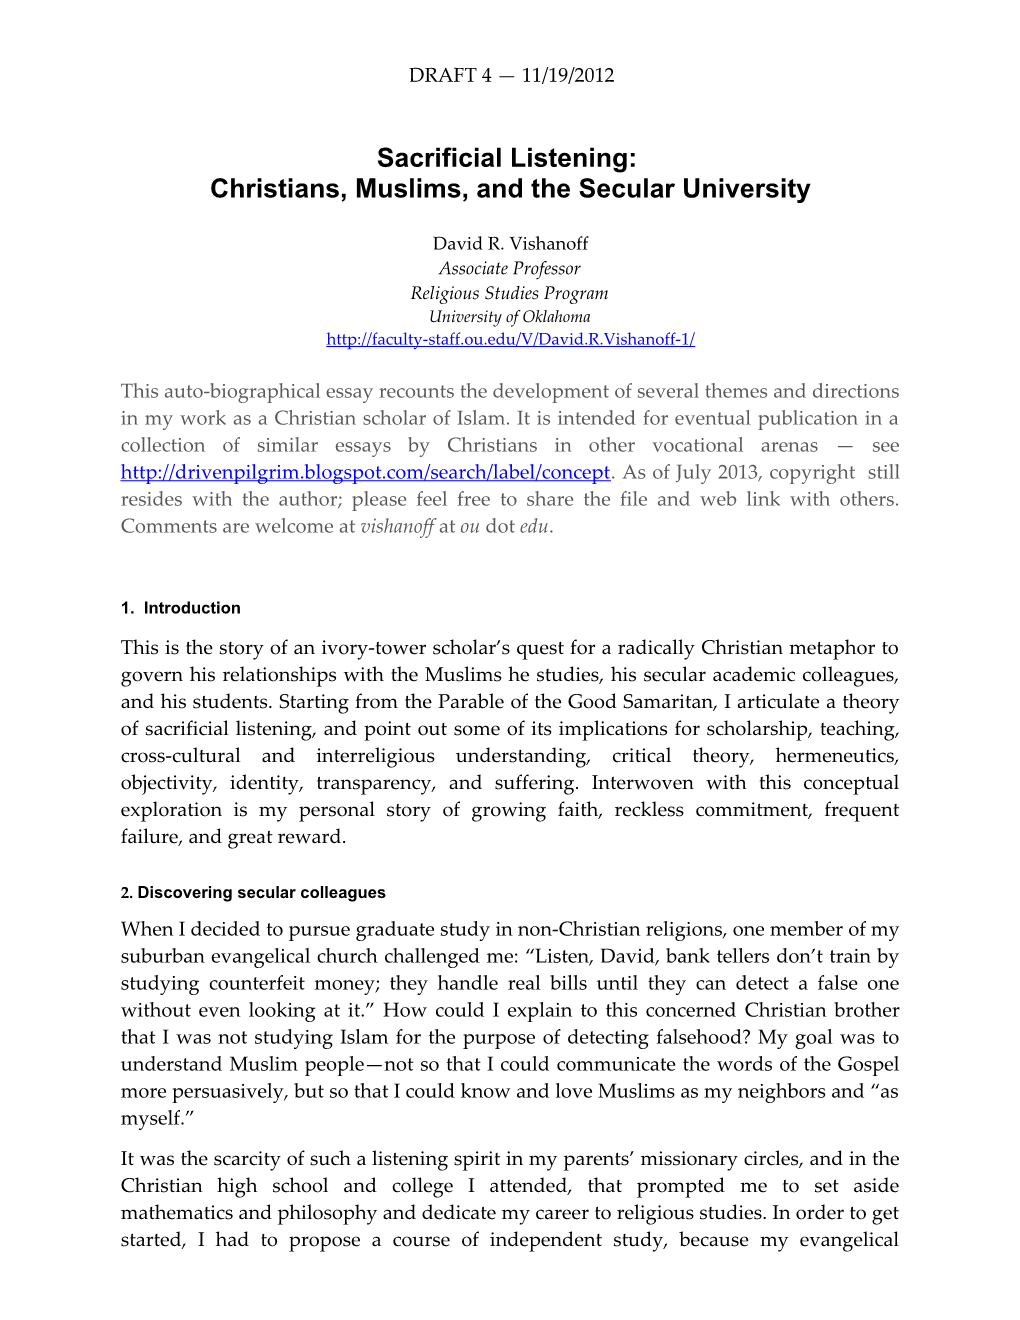 Christians, Muslims, and the Secular University